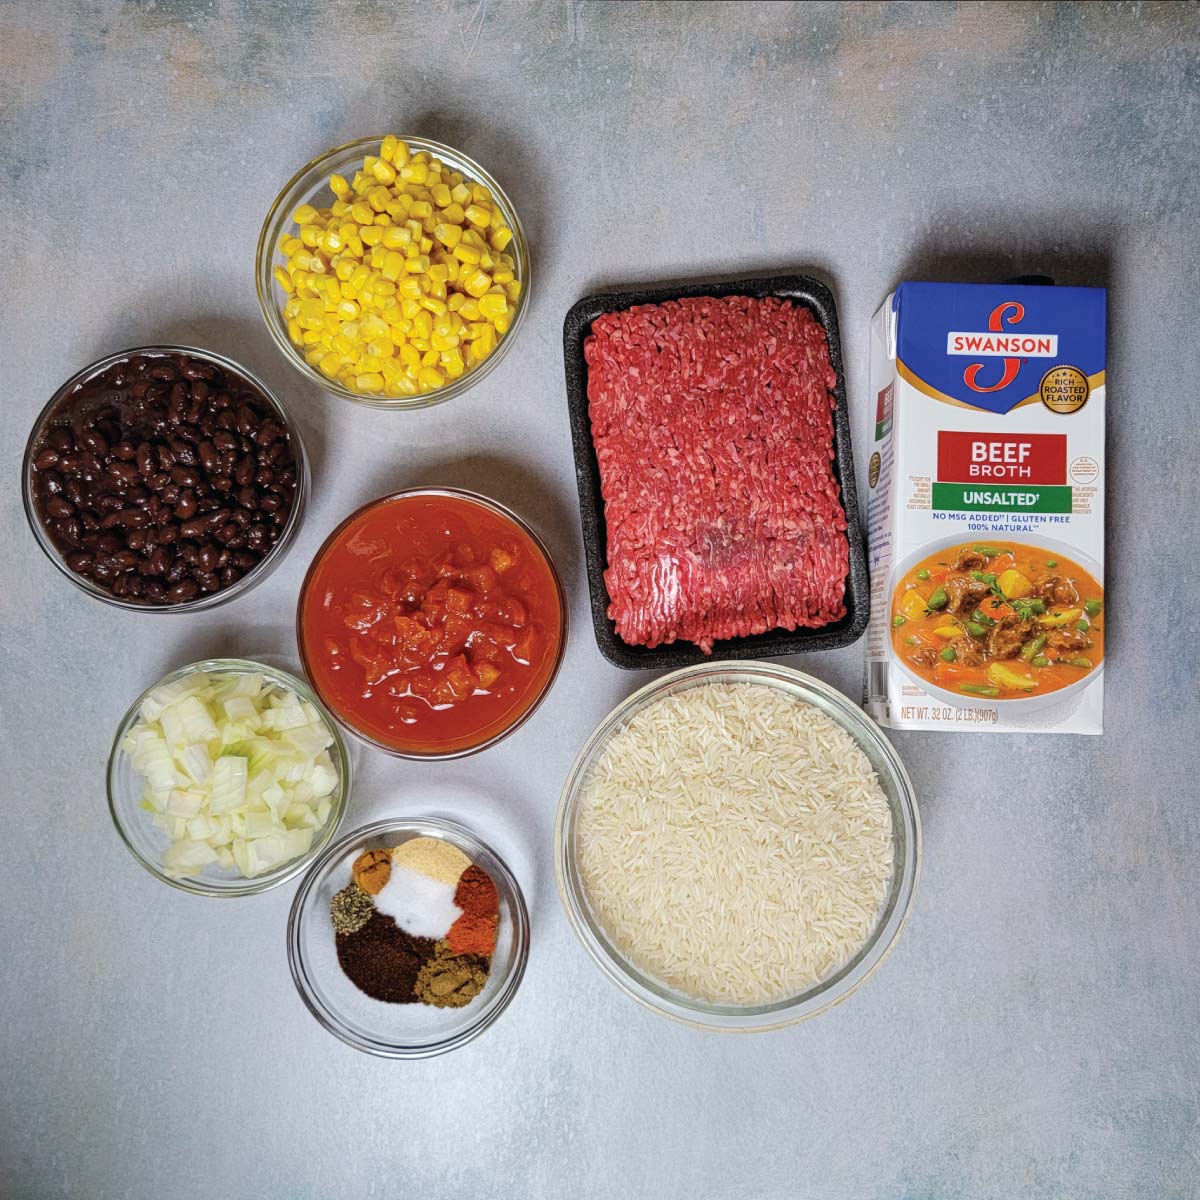 Taco rice ingredients prepped and ready to use.